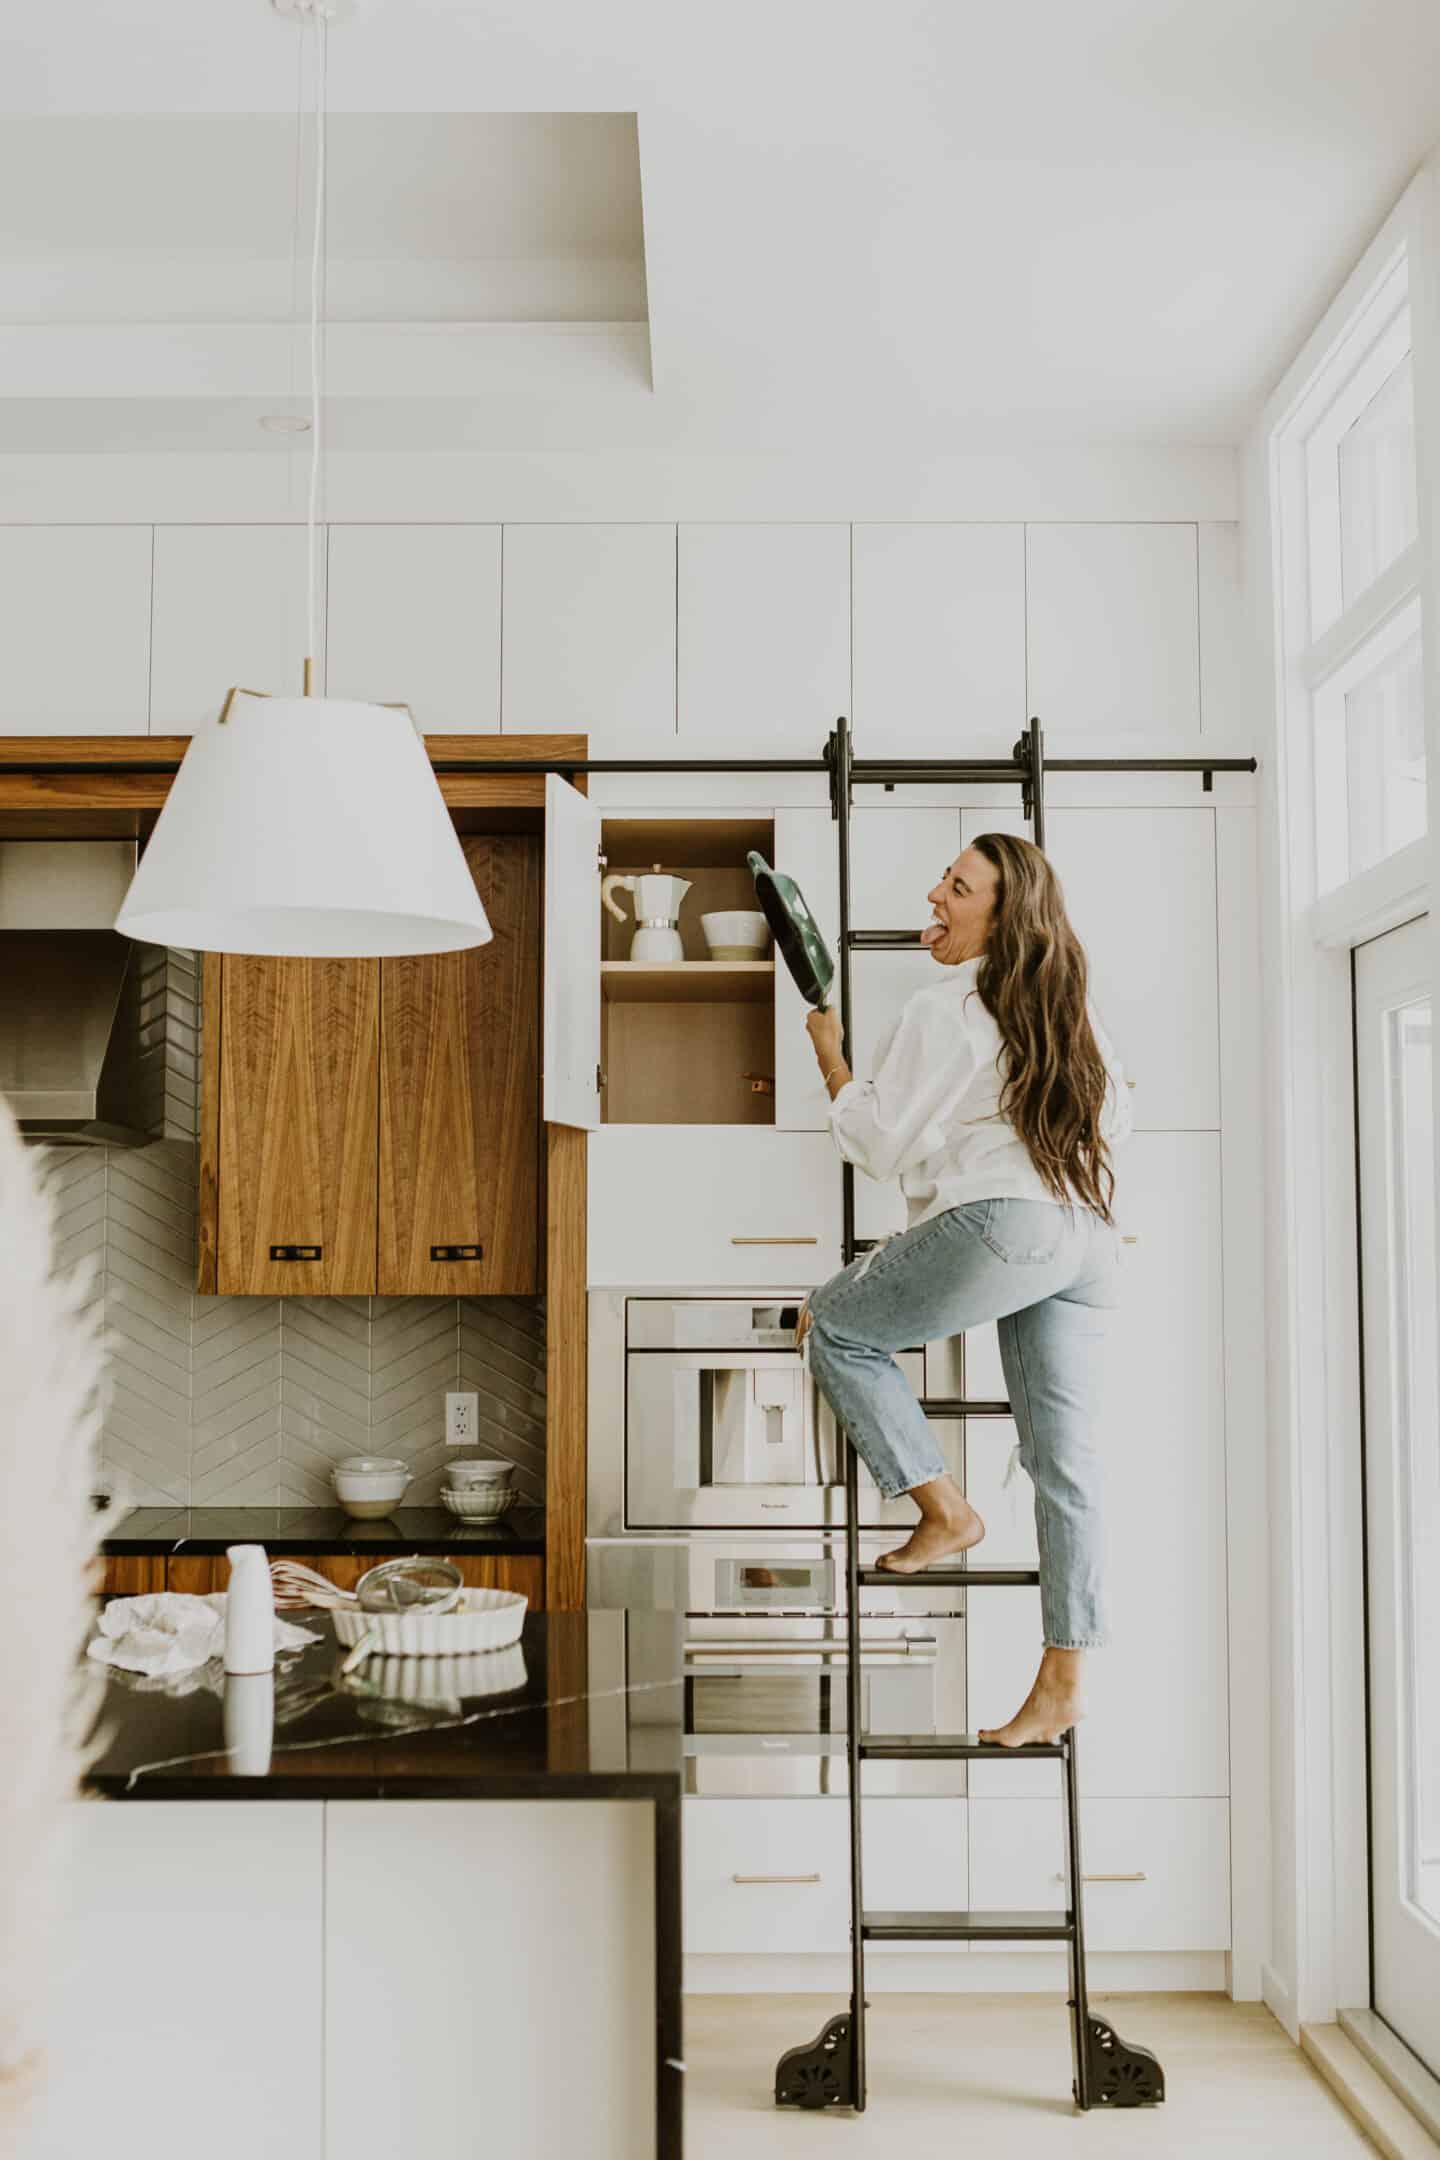 Food blogger, Maria, climbing a ladder in a kitchen to reach a pan.